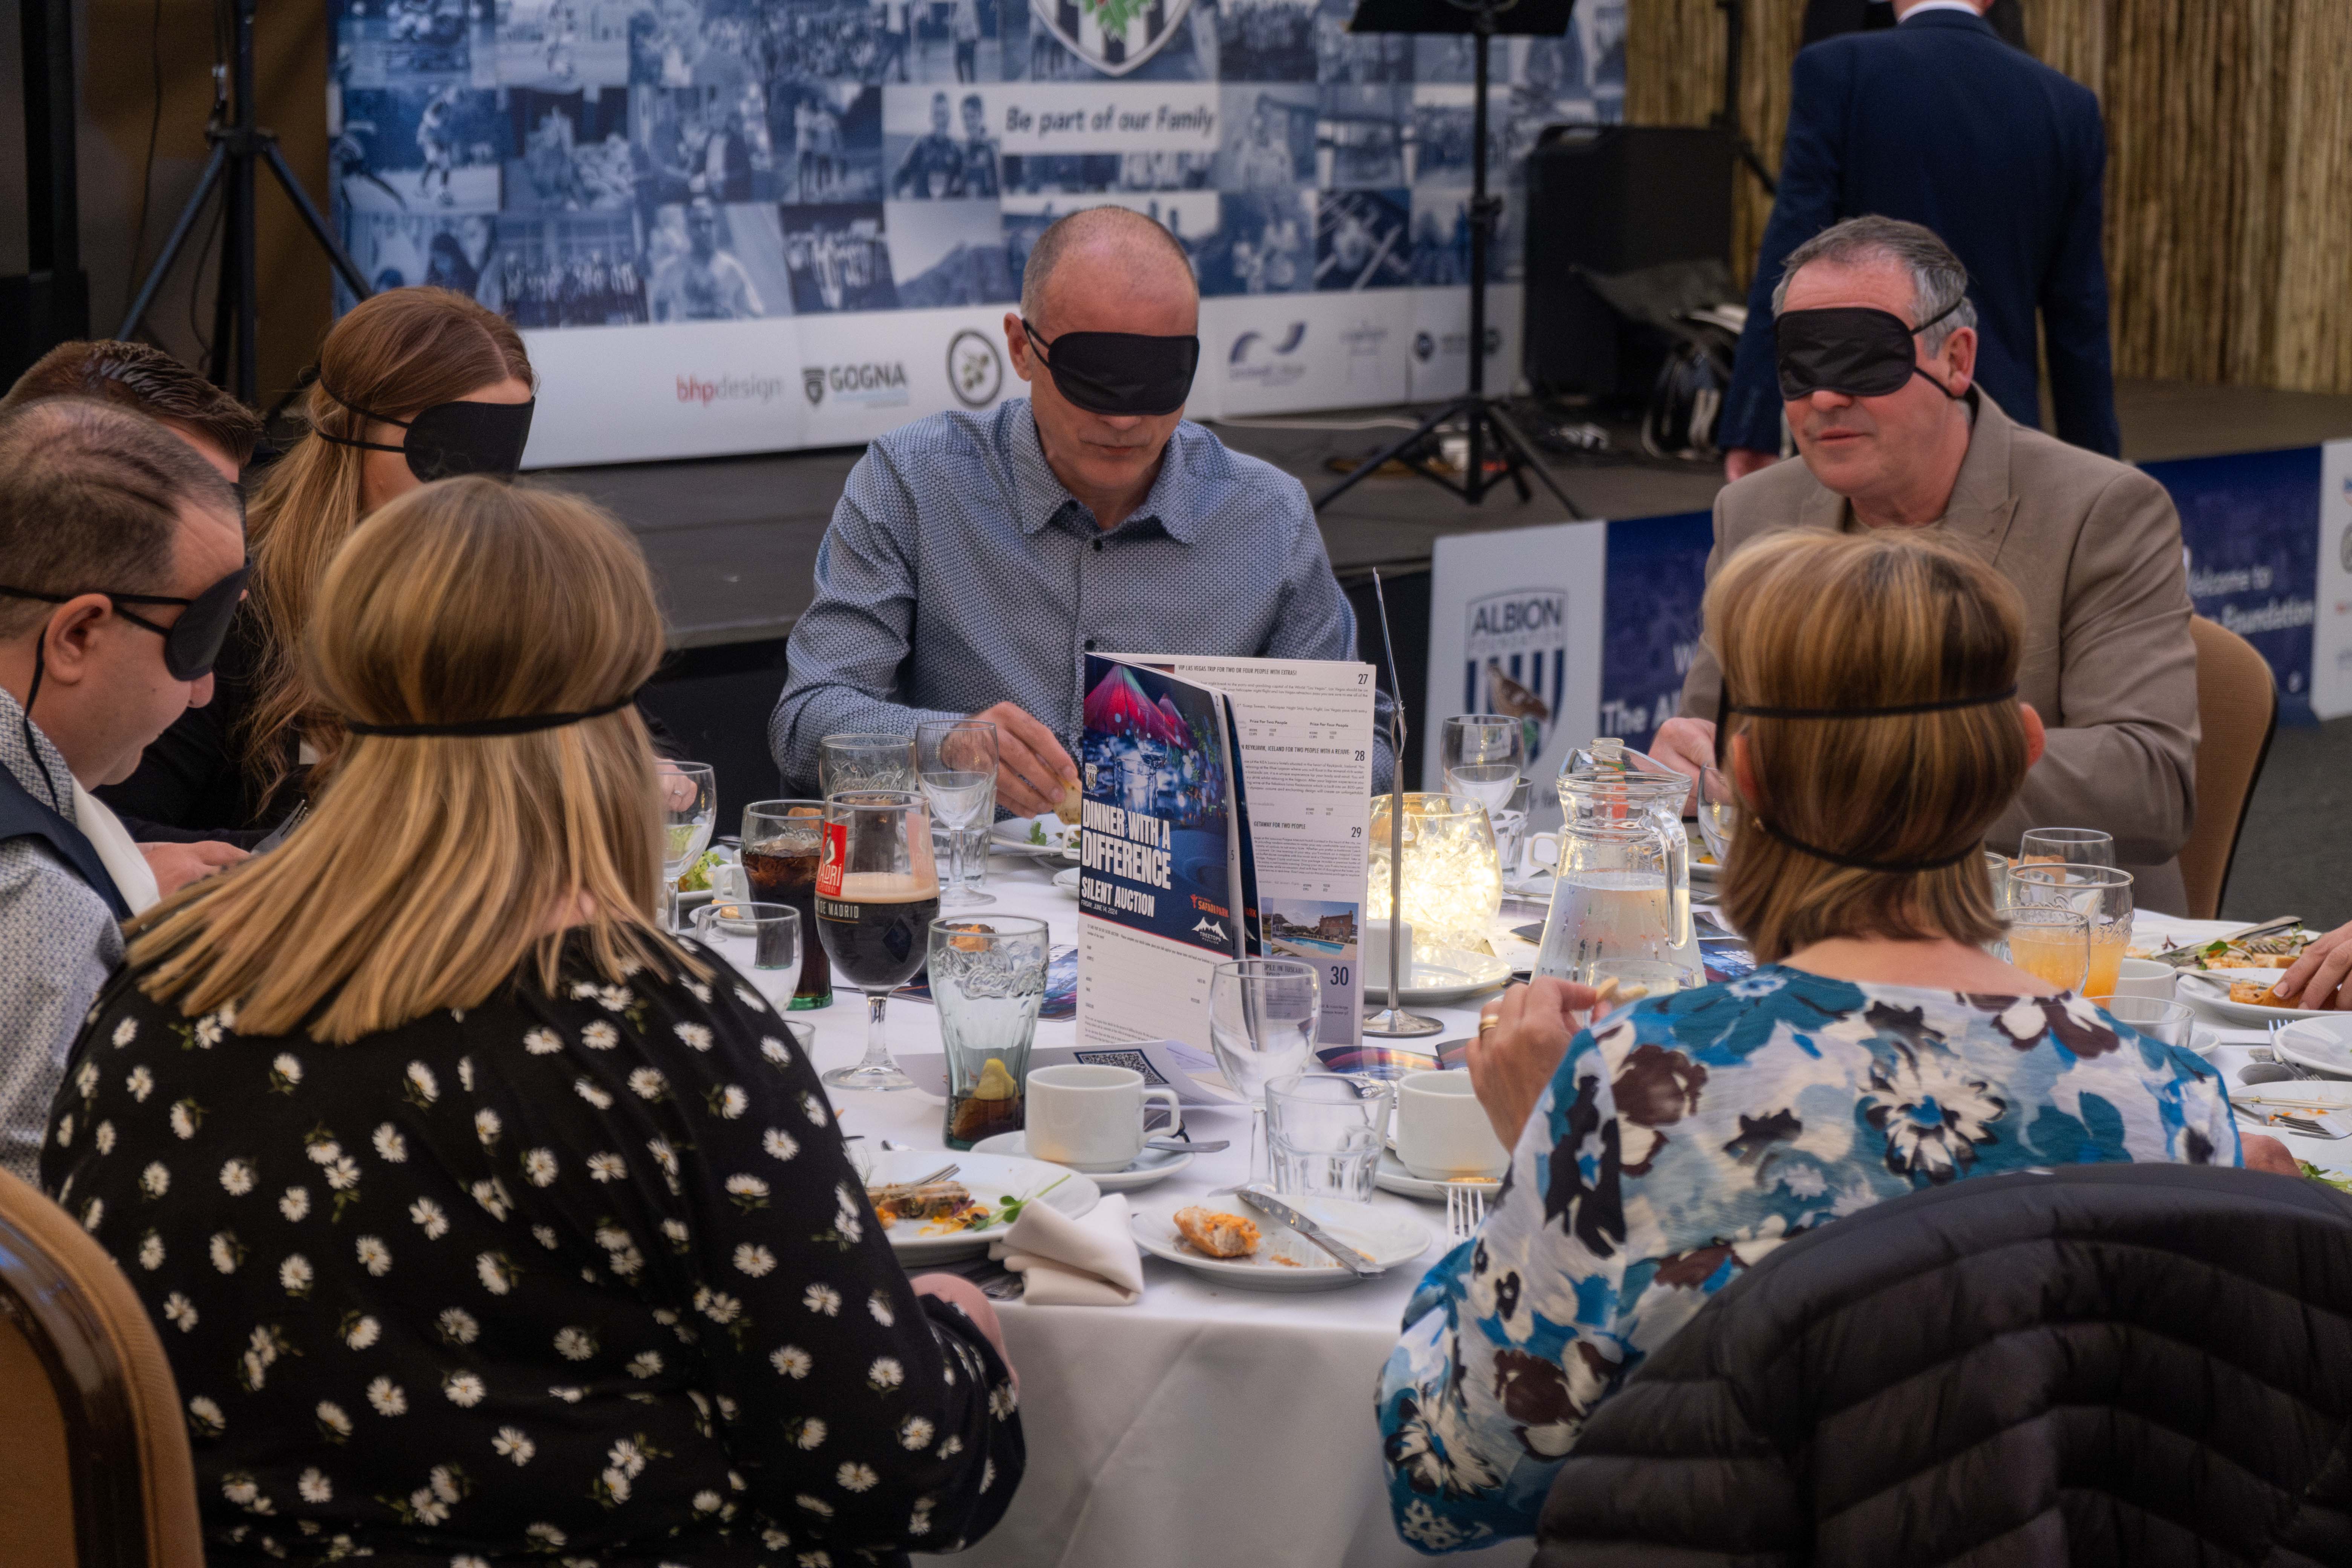 Diners seated at a table blindfolded.